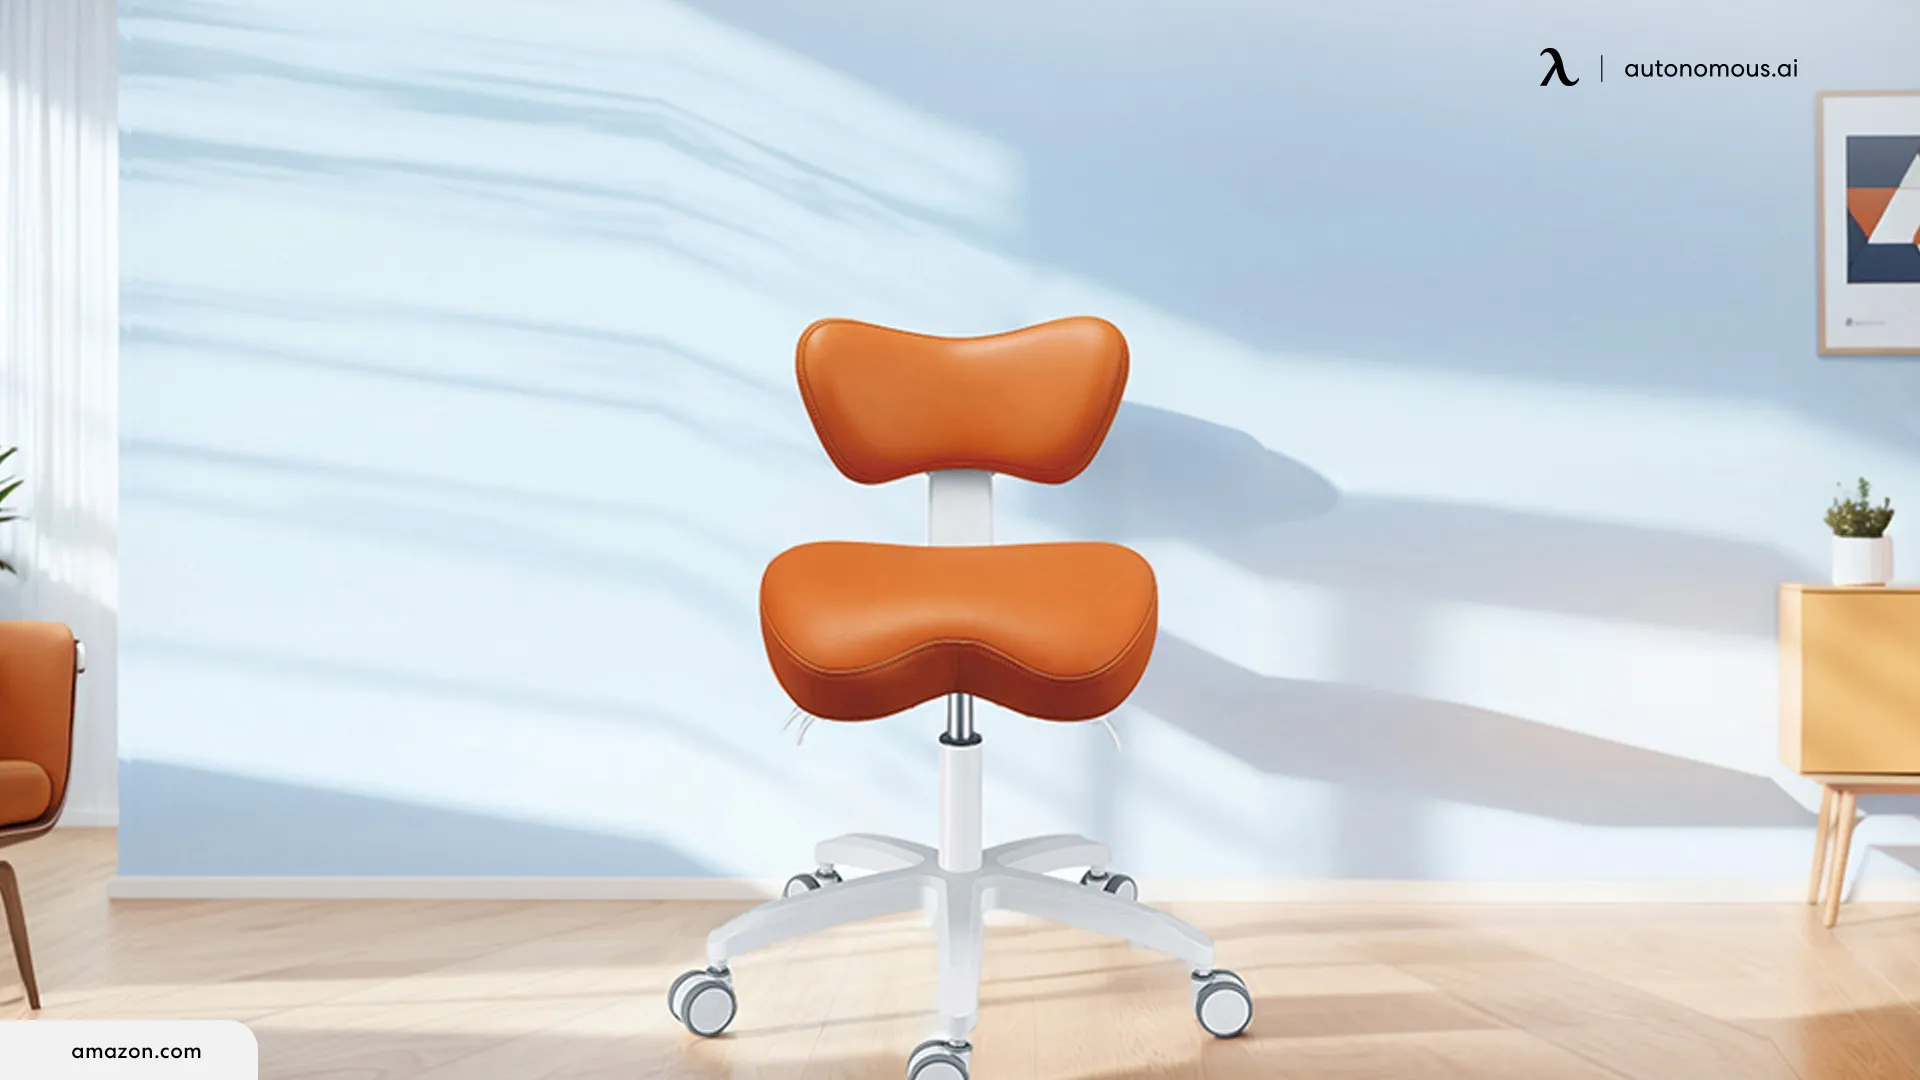 Castanai Saddle Chair with Back Support